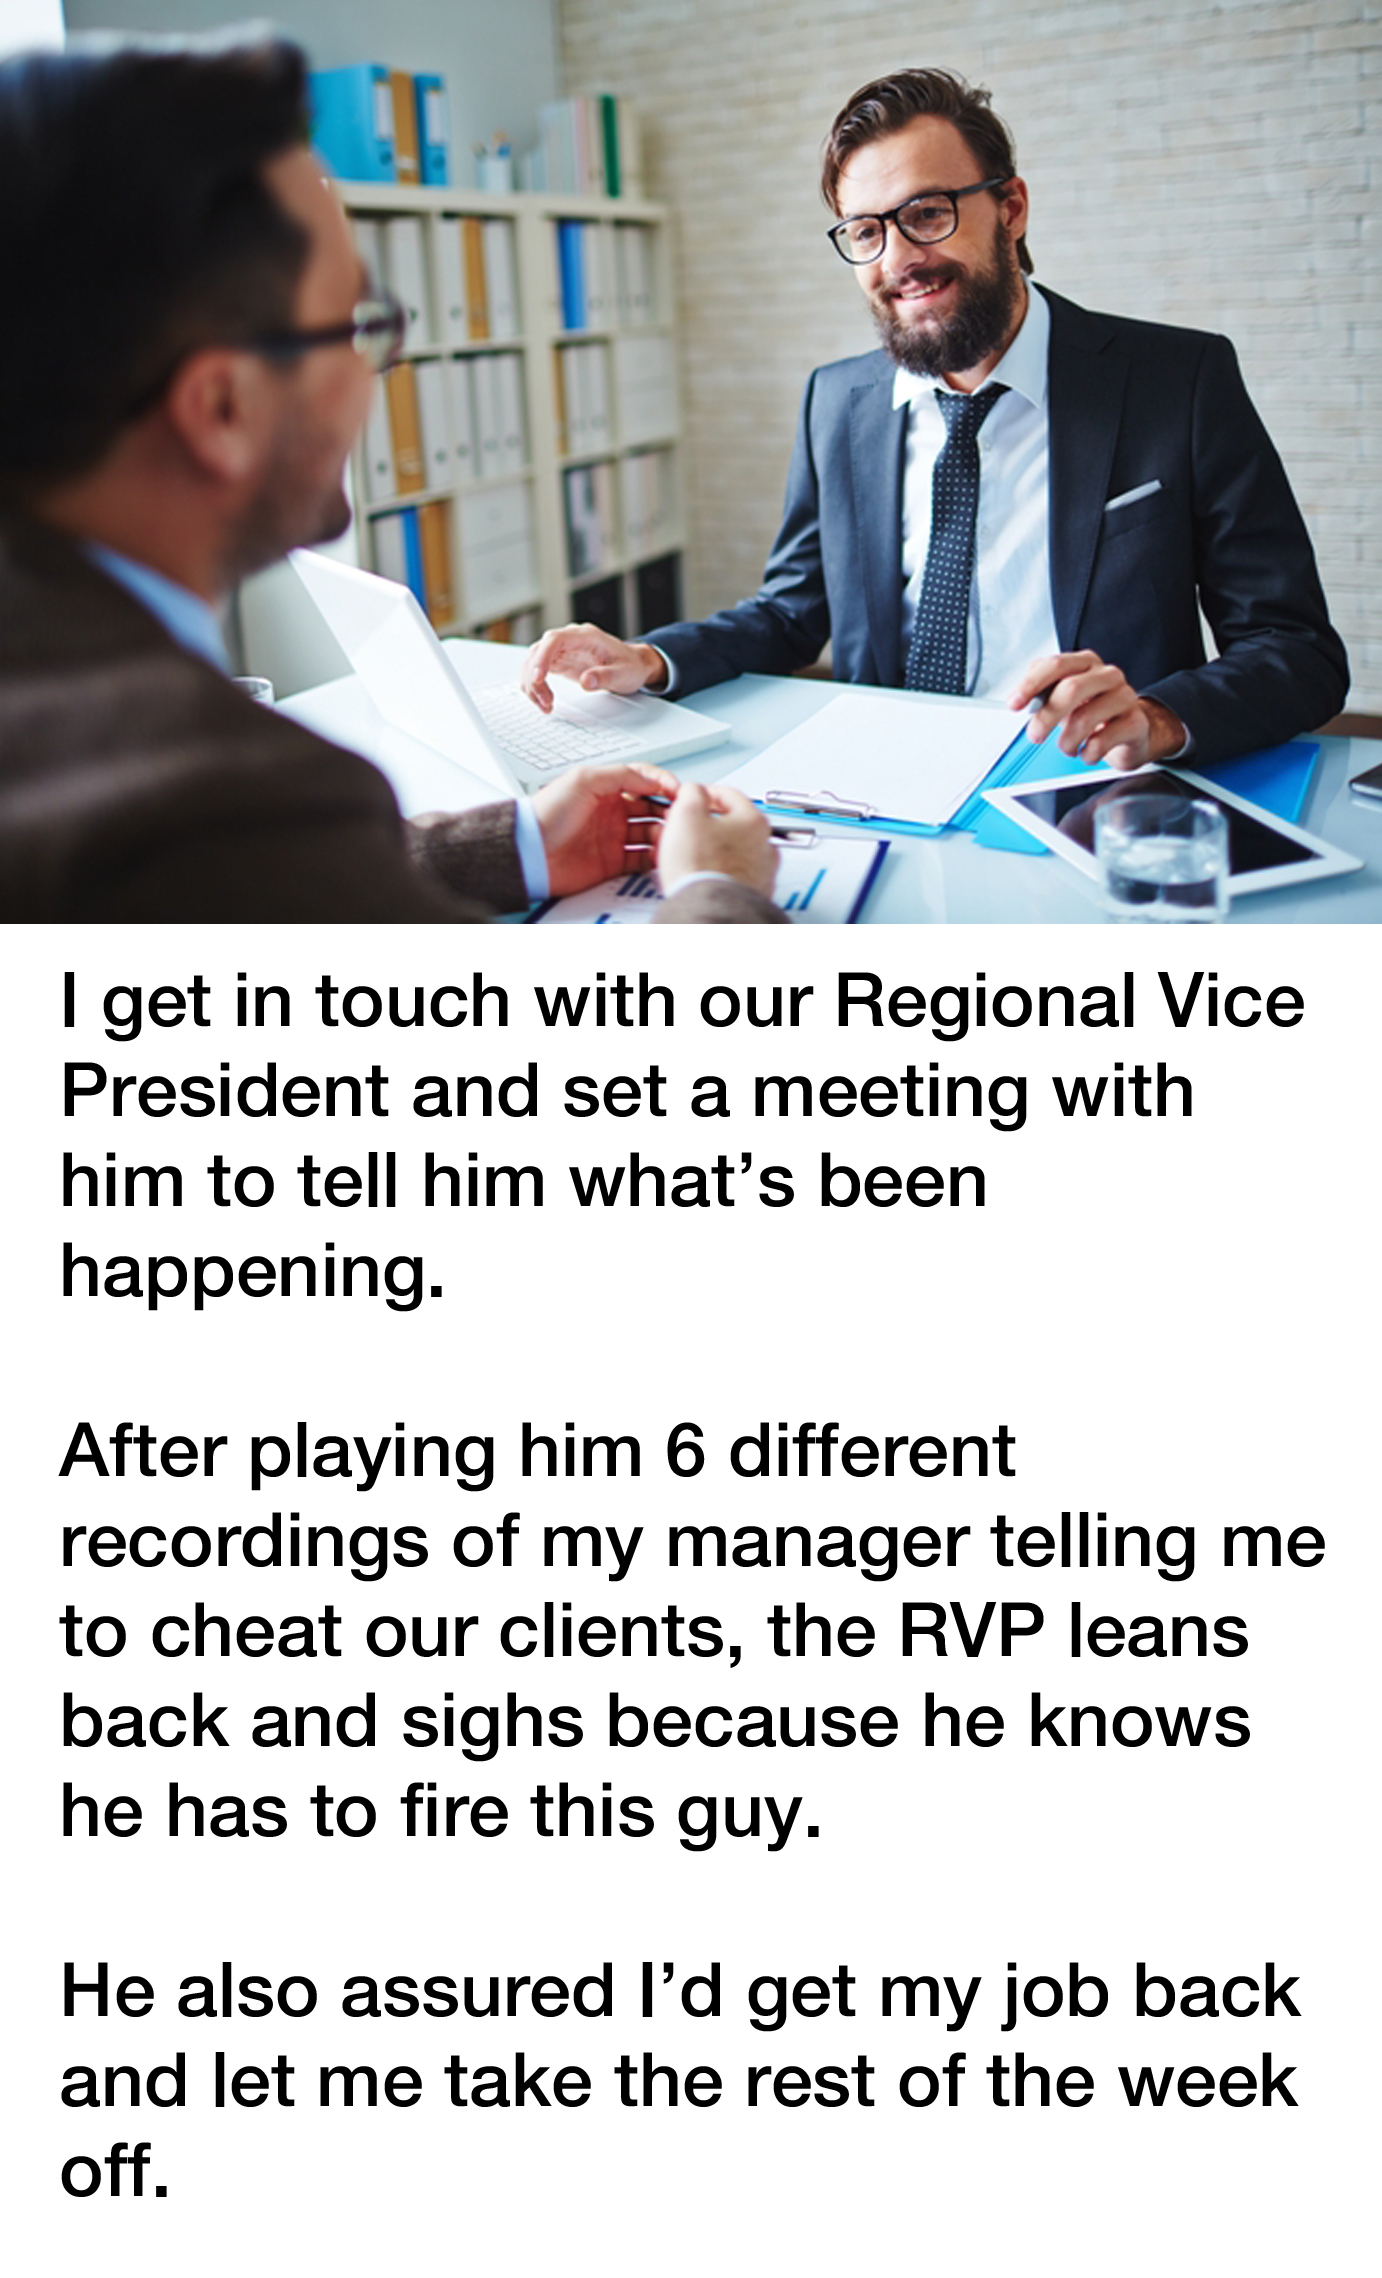 bad manager revenge story reddit - I get in touch with our Regional Vice President and set a meeting with him to tell him what's been happening. After playing him 6 different recordings of my manager telling me to cheat our clients, the Rvp leans back and